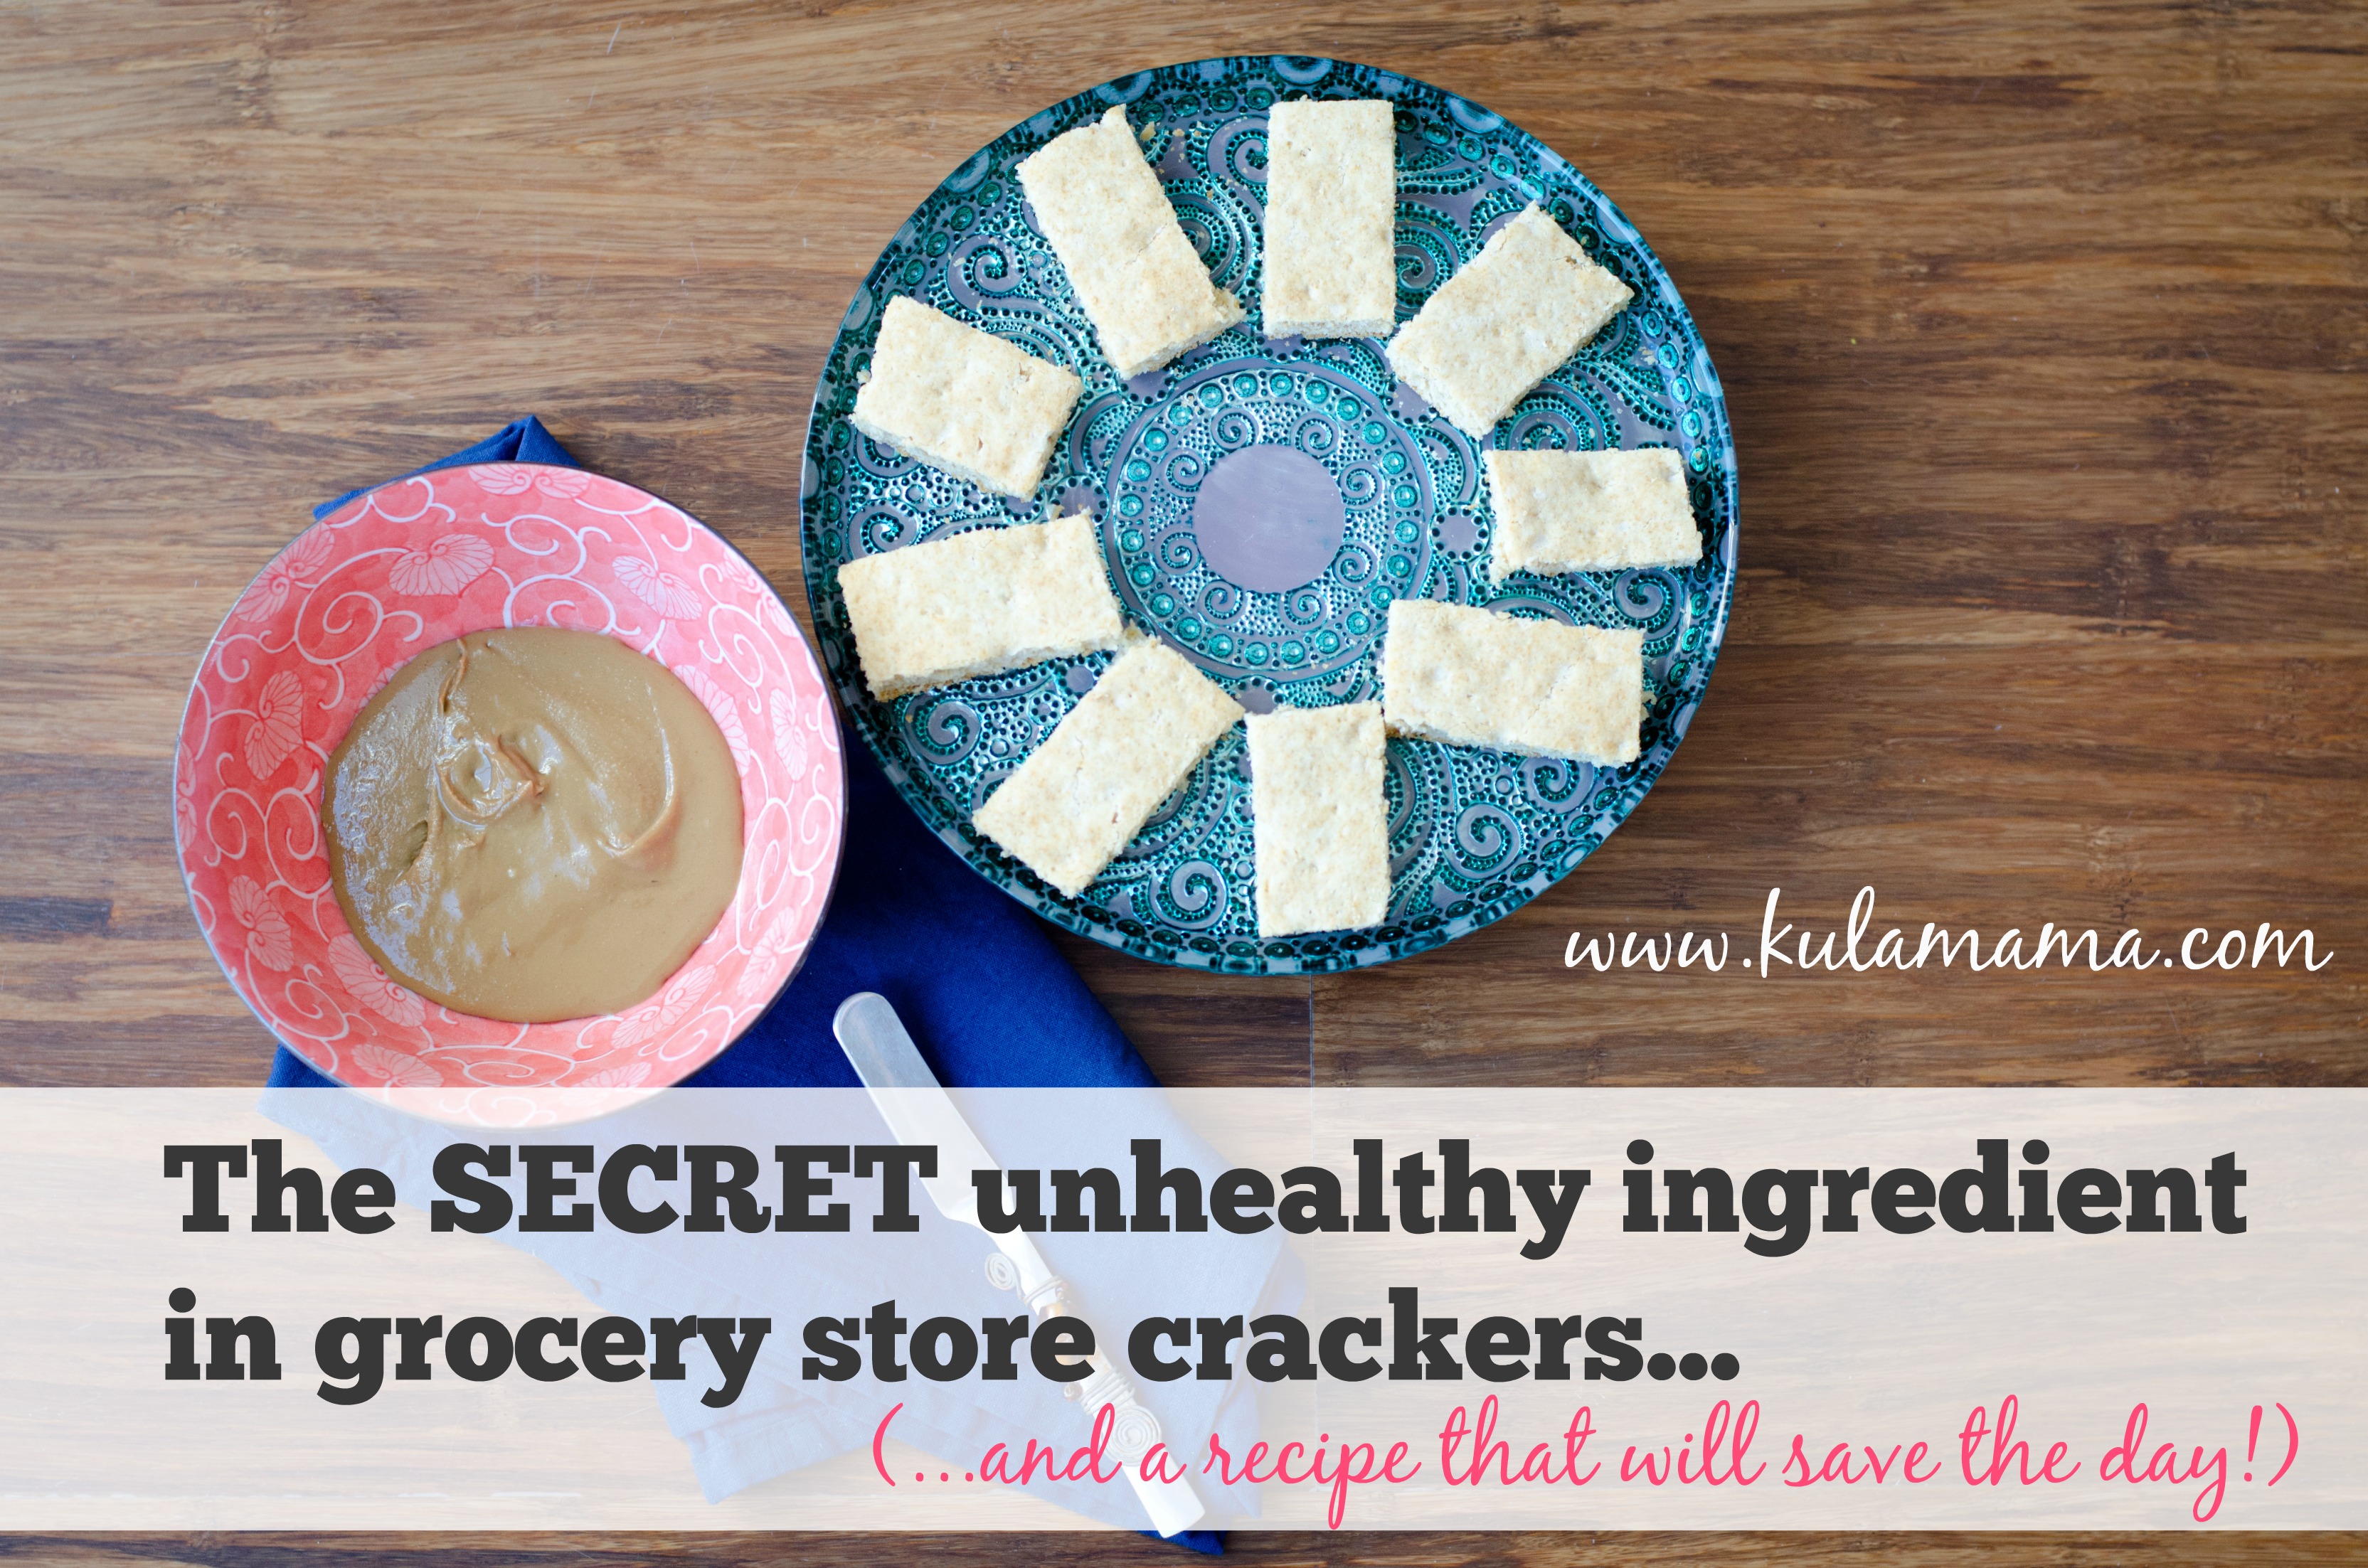 The Secret Unhealthy Ingredient in Crackers (and a recipe that will save the day!)